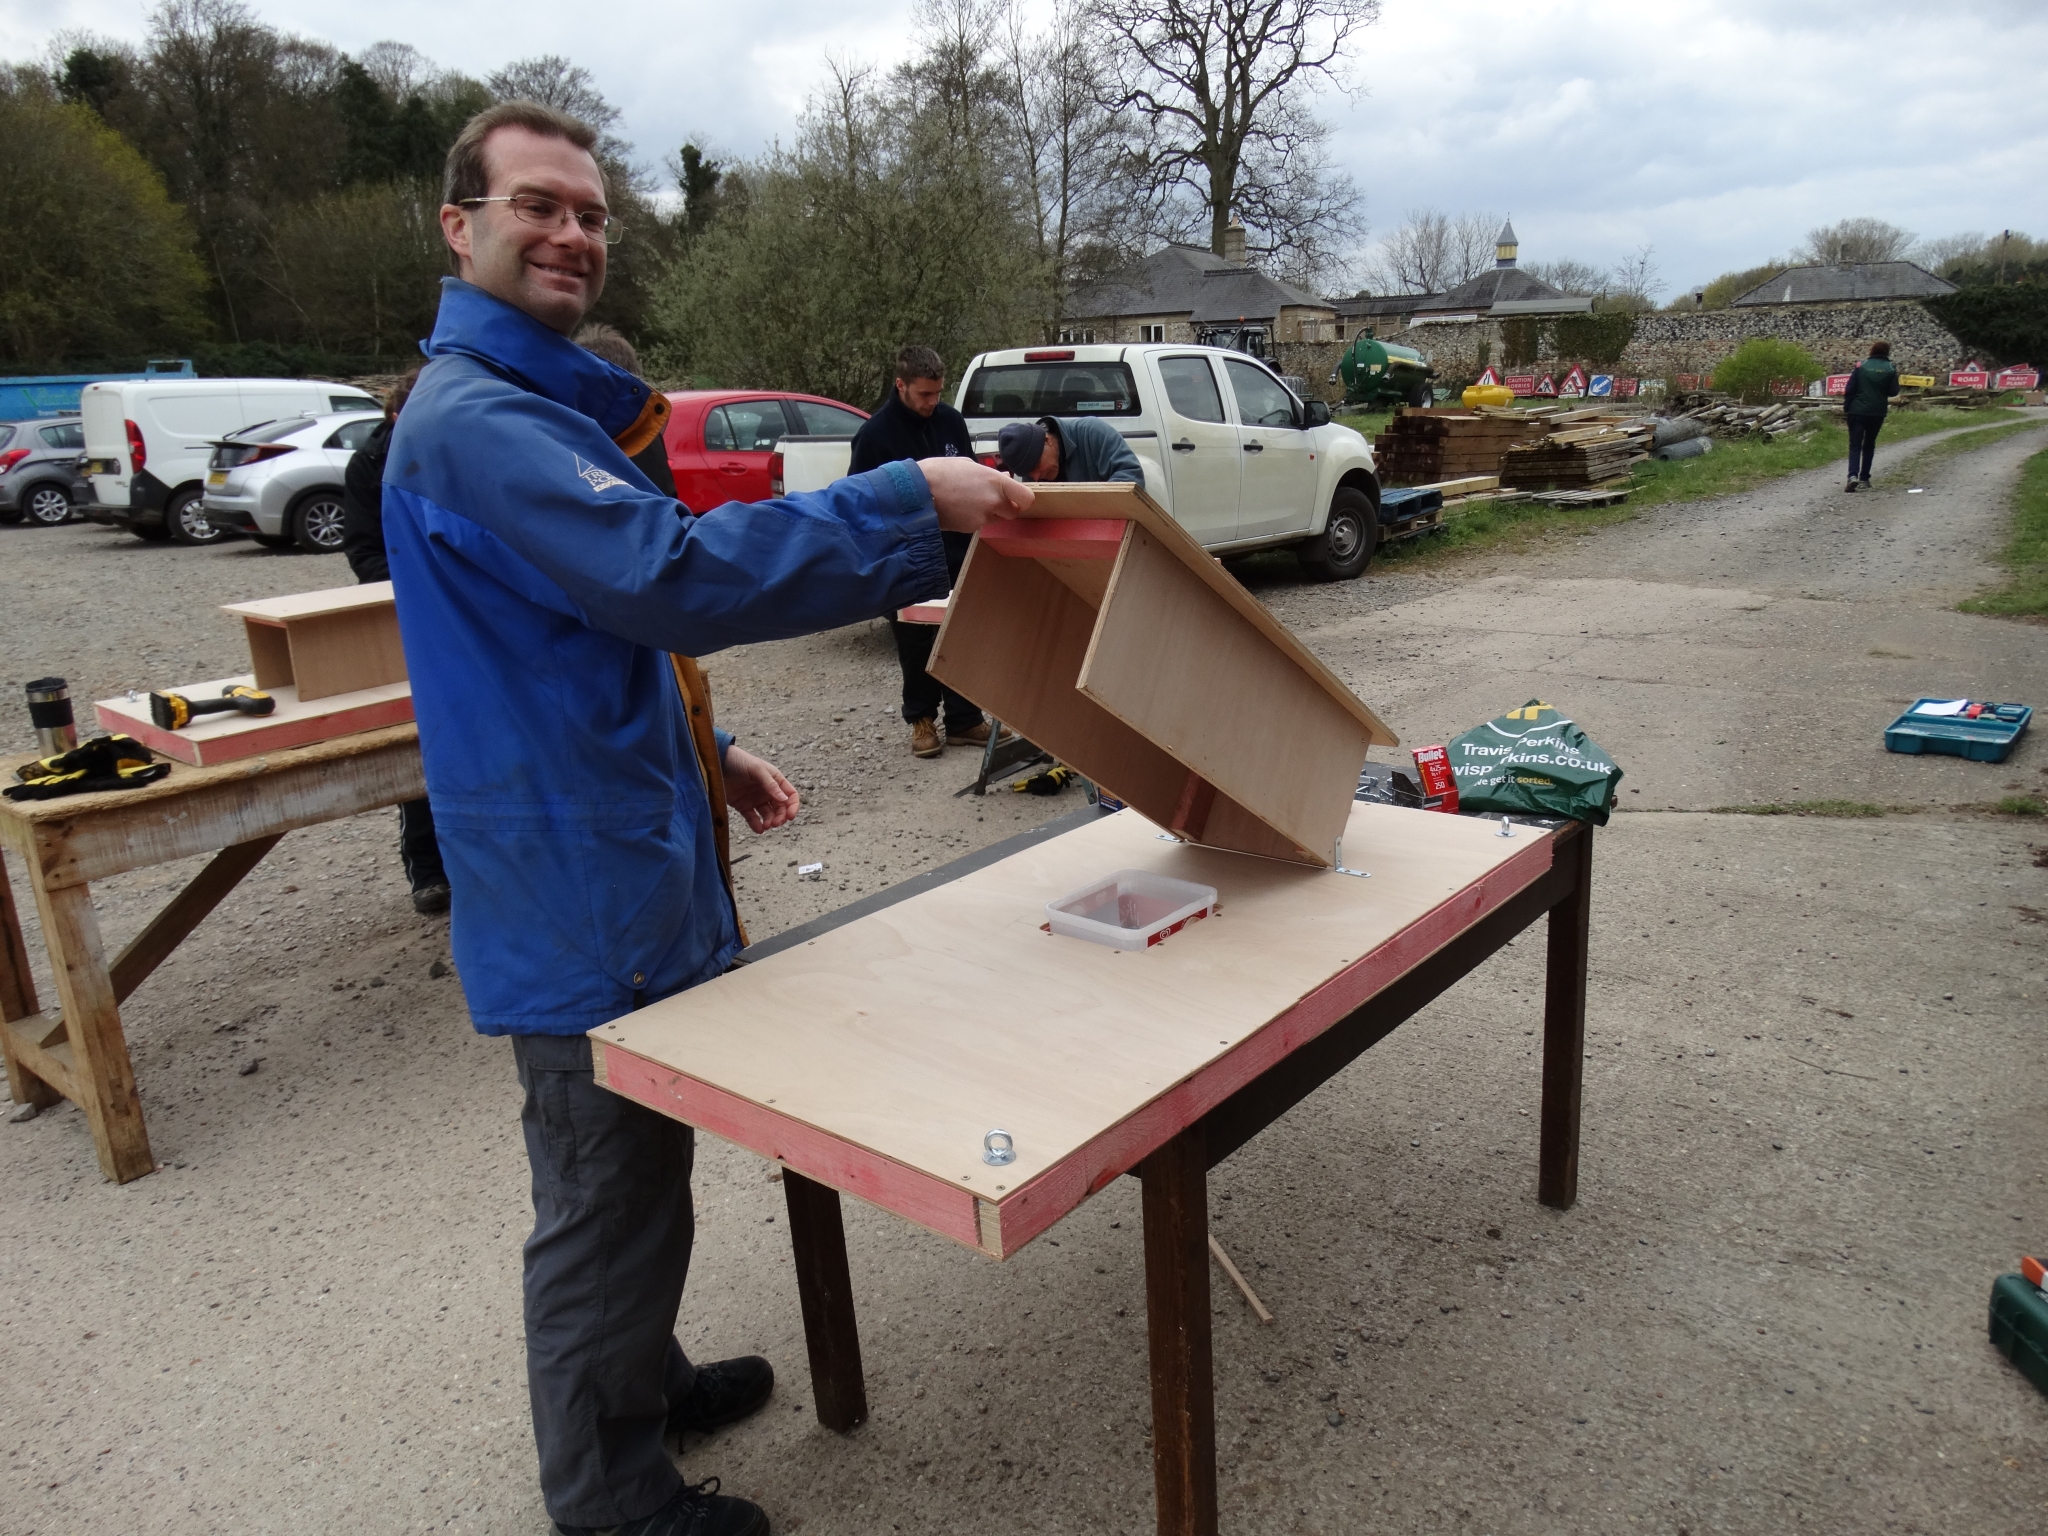 A photo from the FoTF Conservation Event - April 2019 - Mink Raft Construction at Santon Downham Workshops : A volunteer proudly display a mink raft component